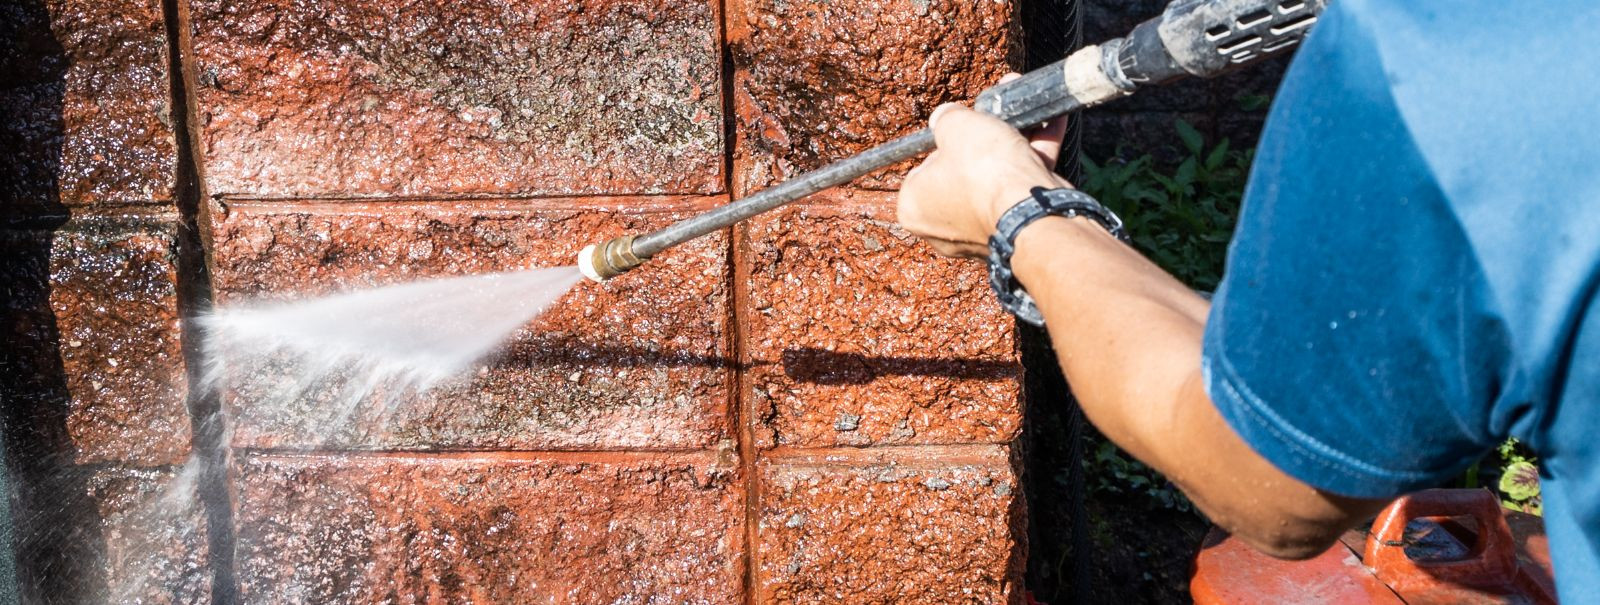 Facade washing is the process of cleaning the exterior surfaces of buildings to remove dirt, grime, pollutants, and other unsightly materials. This practice is 